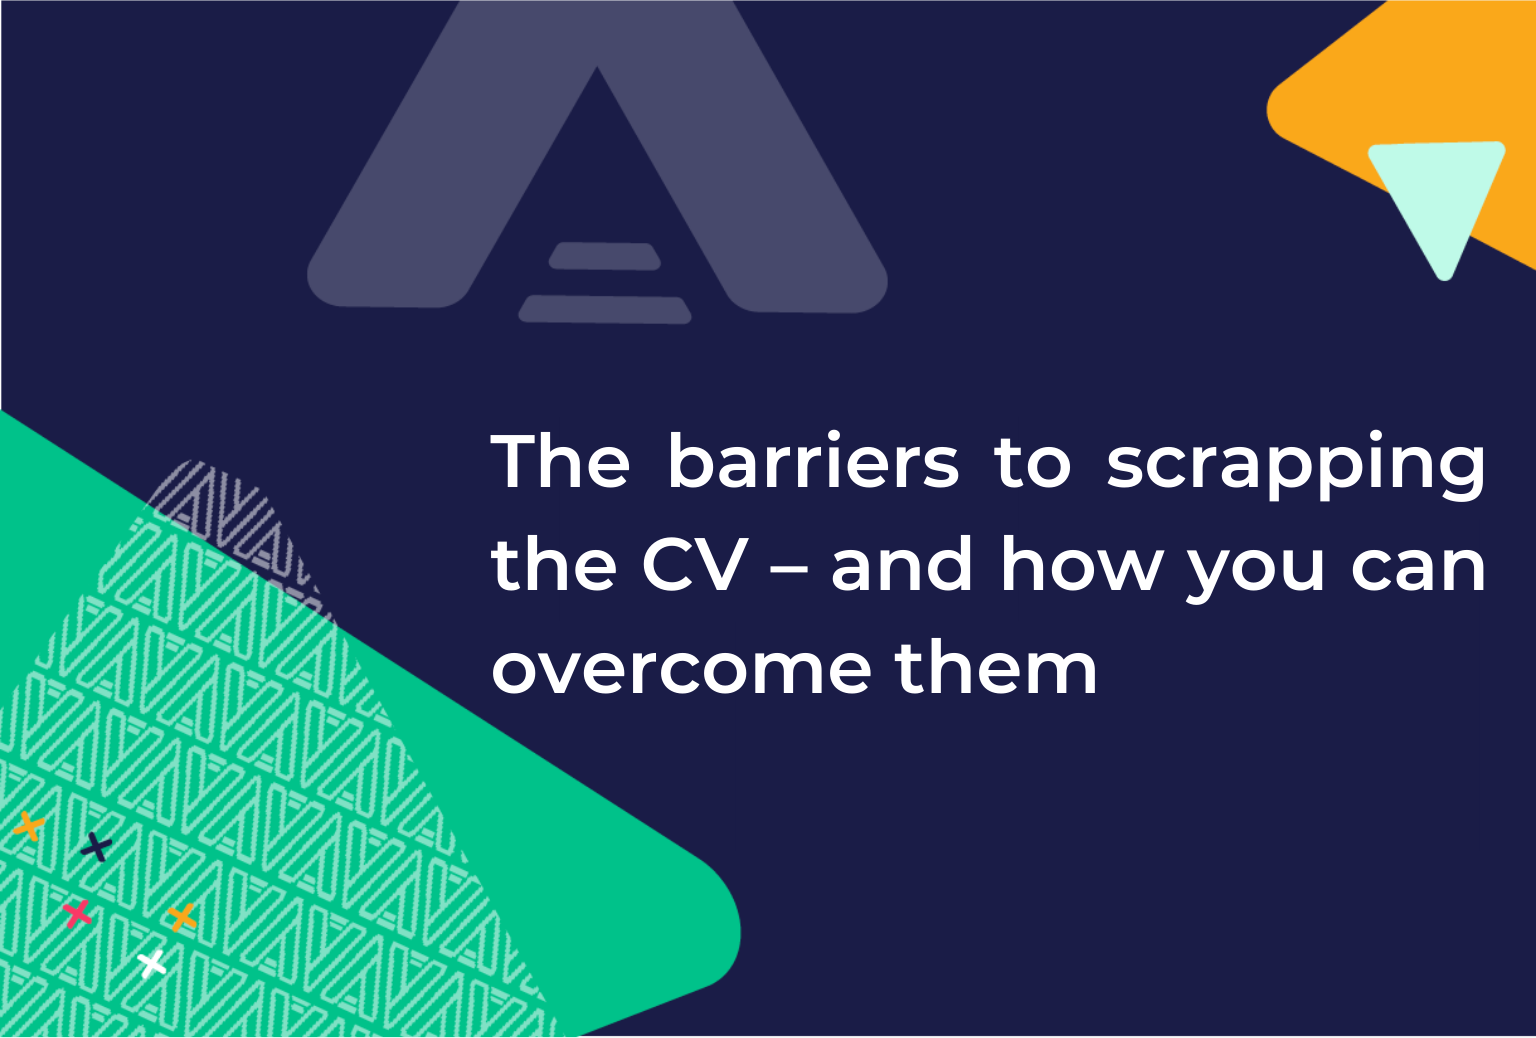 The barriers to scrapping the CV – and how you can overcome them